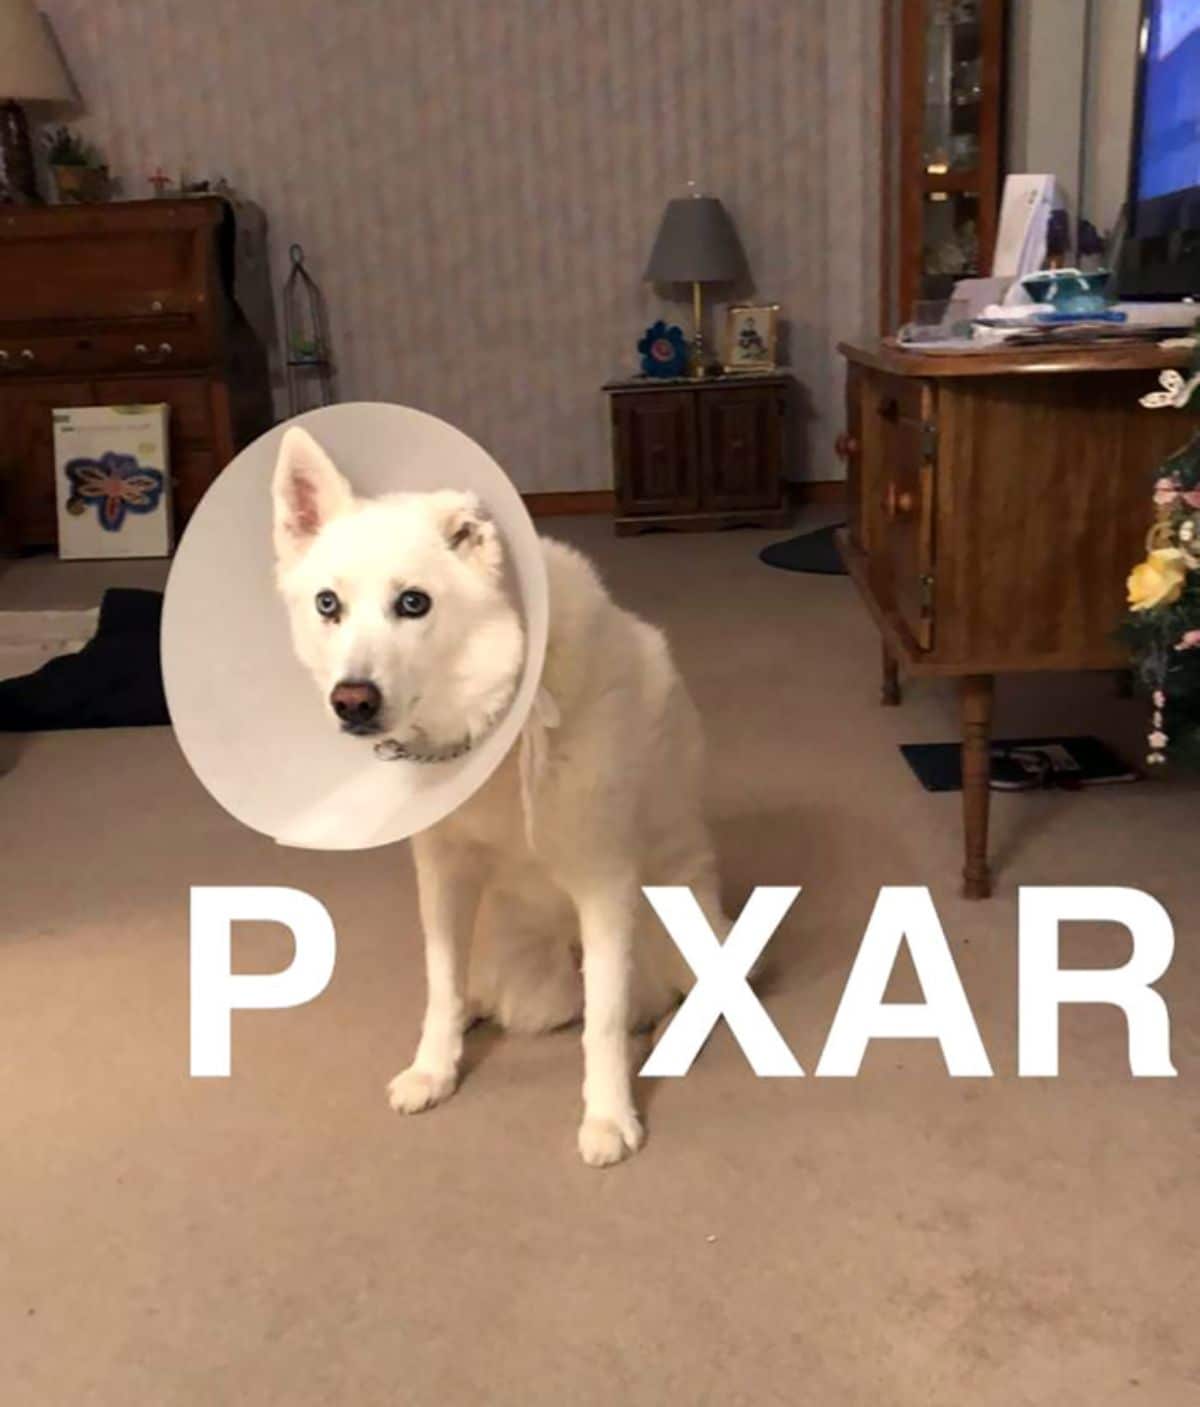 white dog in a white cone of shame with the dog standing in as a PIXAR sign